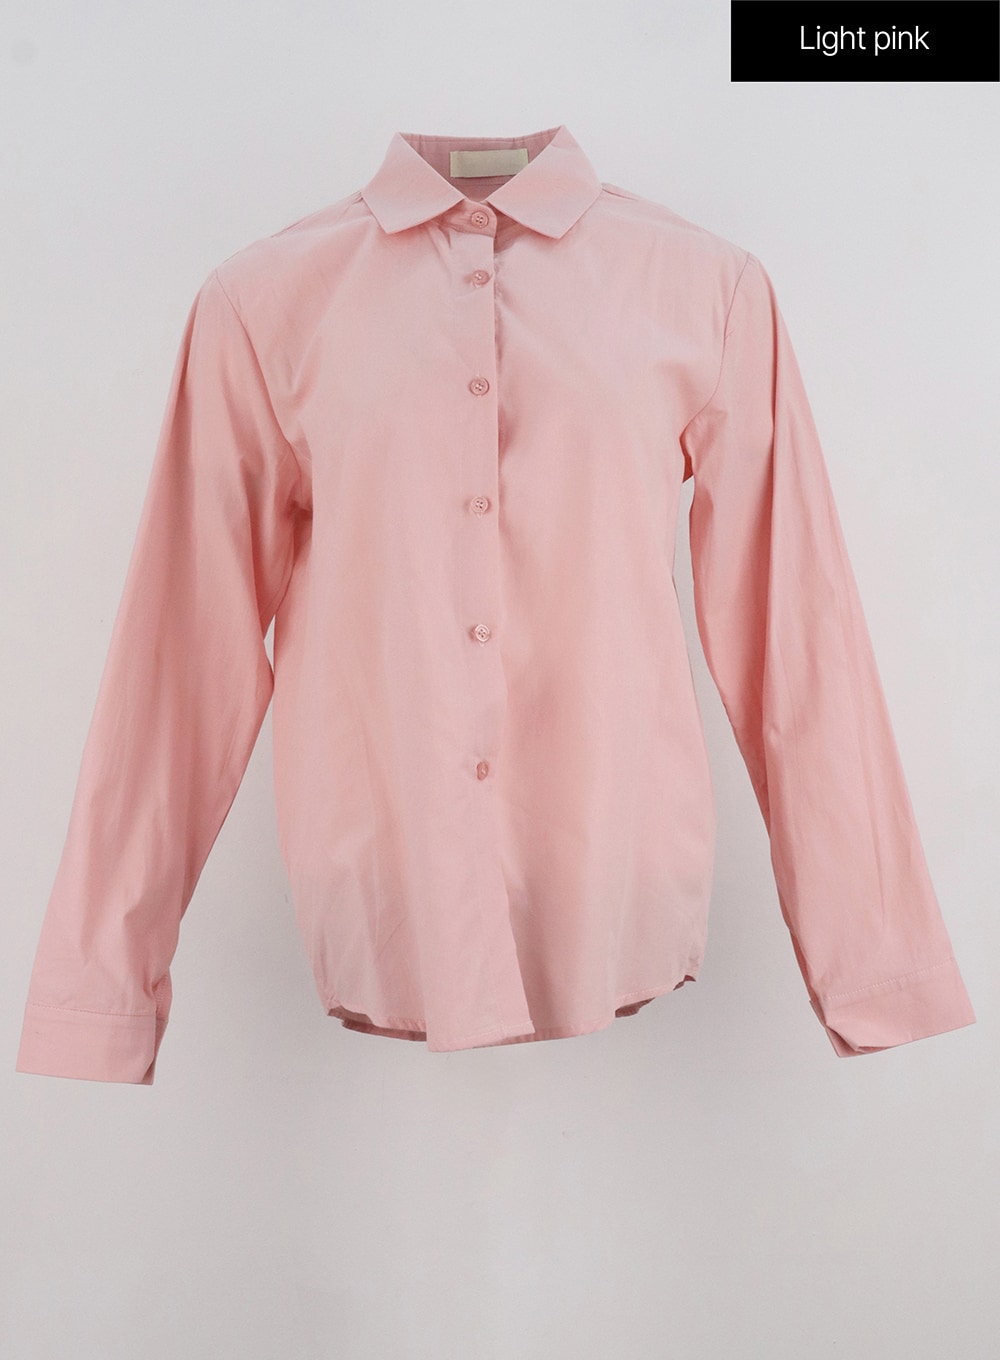 solid-button-down-shirt-ig312